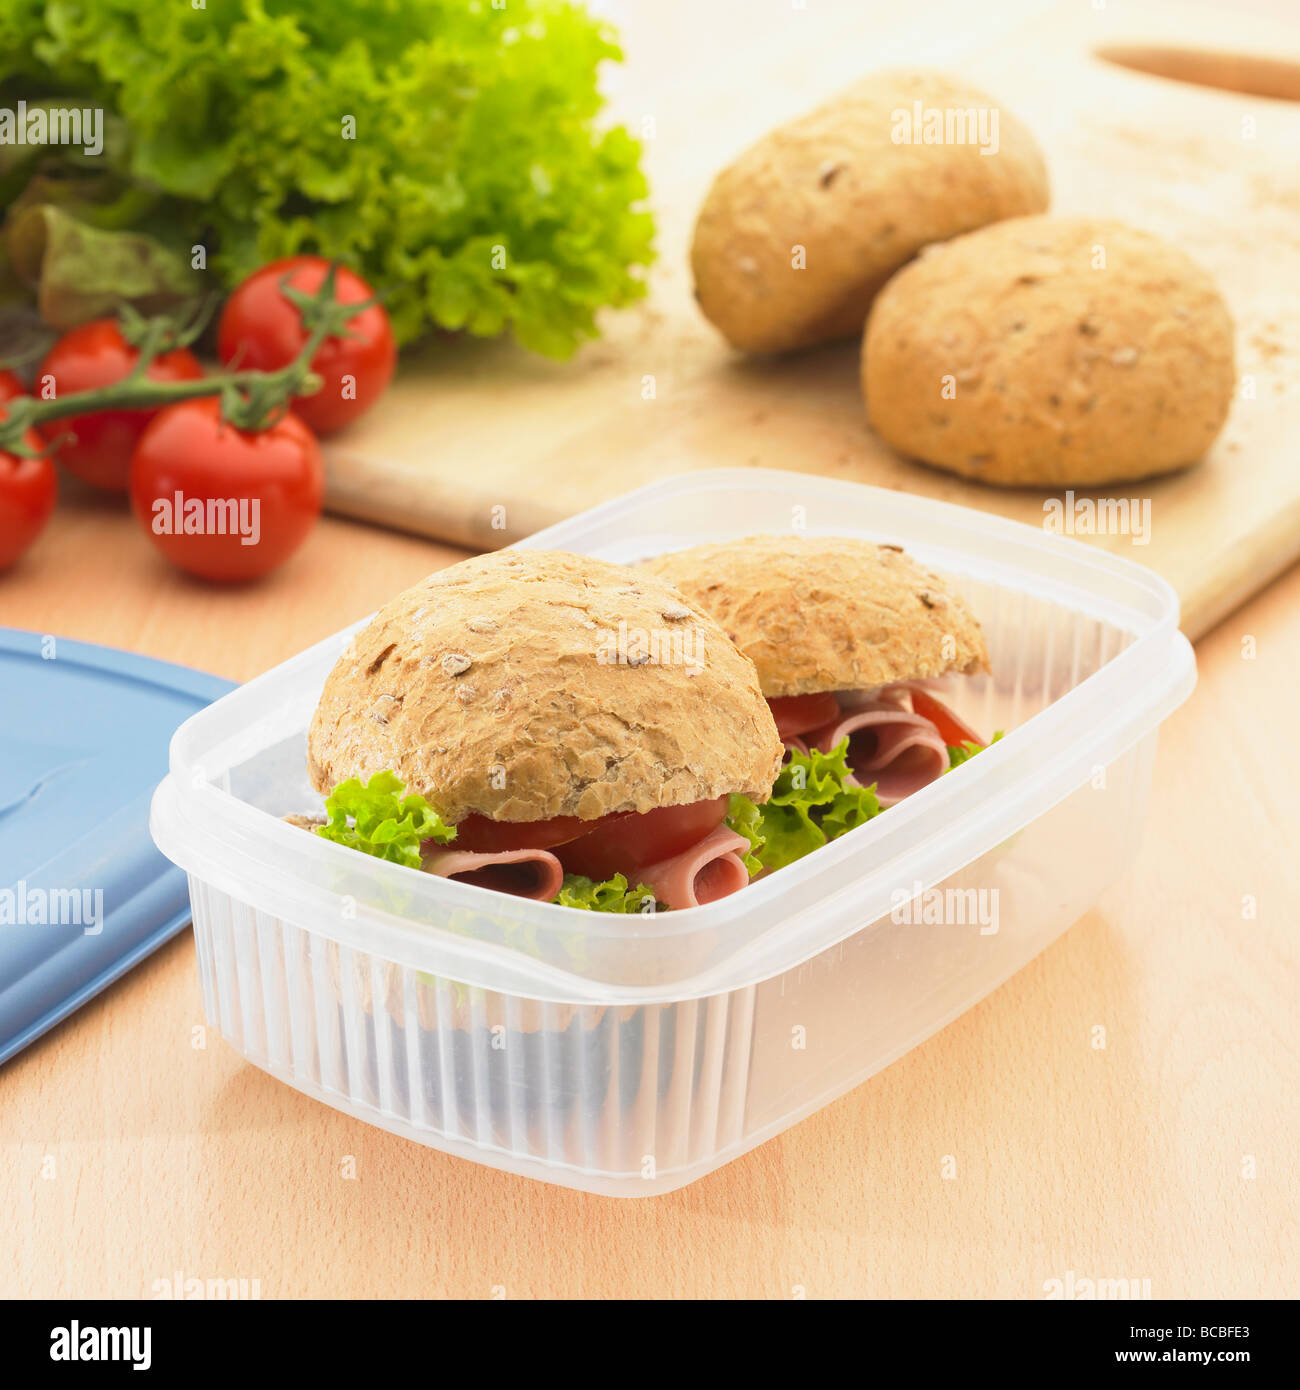 Healthy packed lunch. Stock Photo